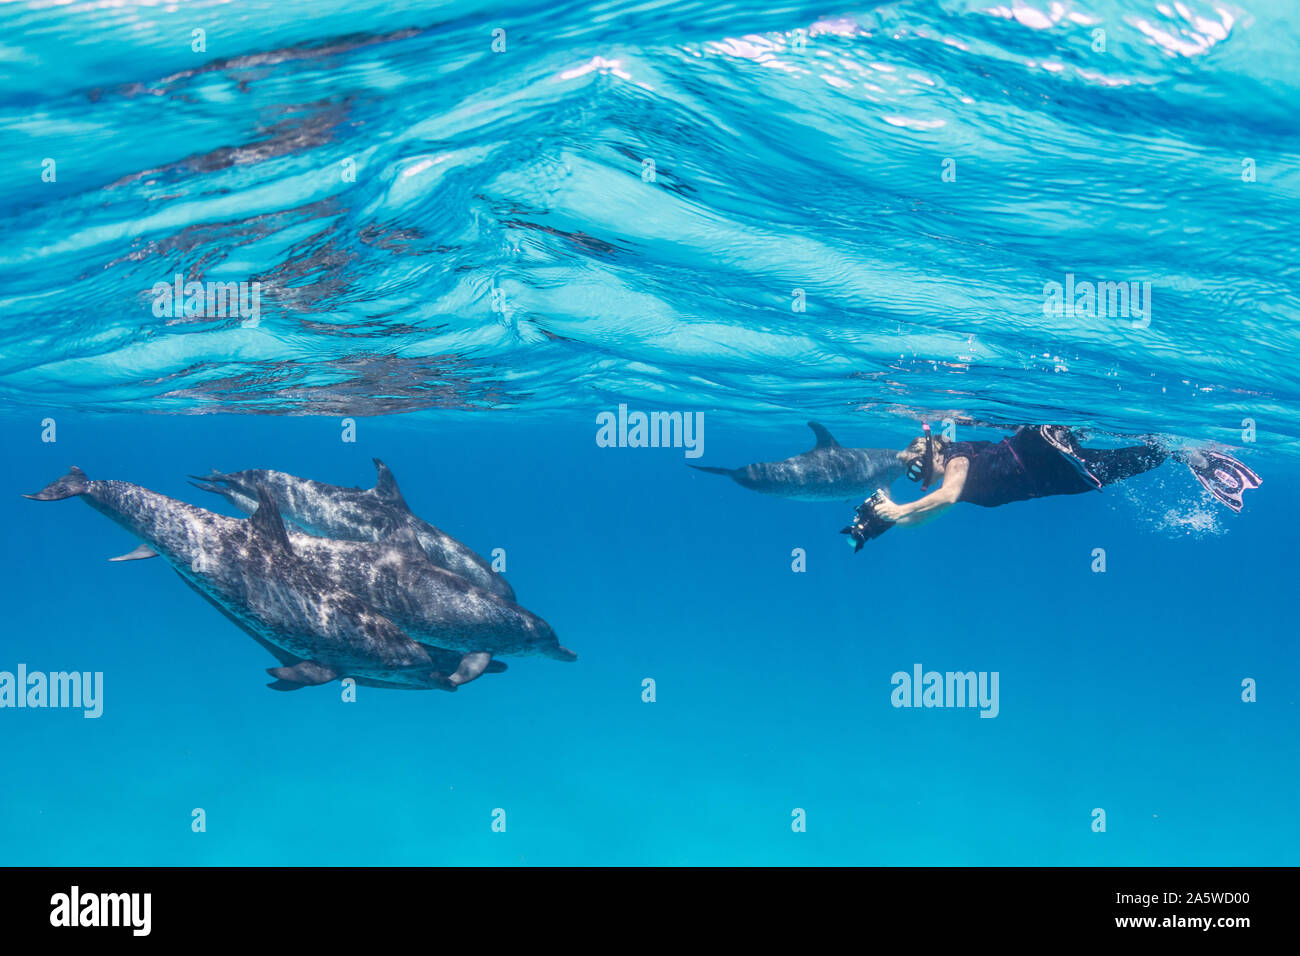 A snorkeler captures photos of a pod of Atlantic Spotted Dolphins (Stenella frontalis) in Bimini, Bahamas. Stock Photo